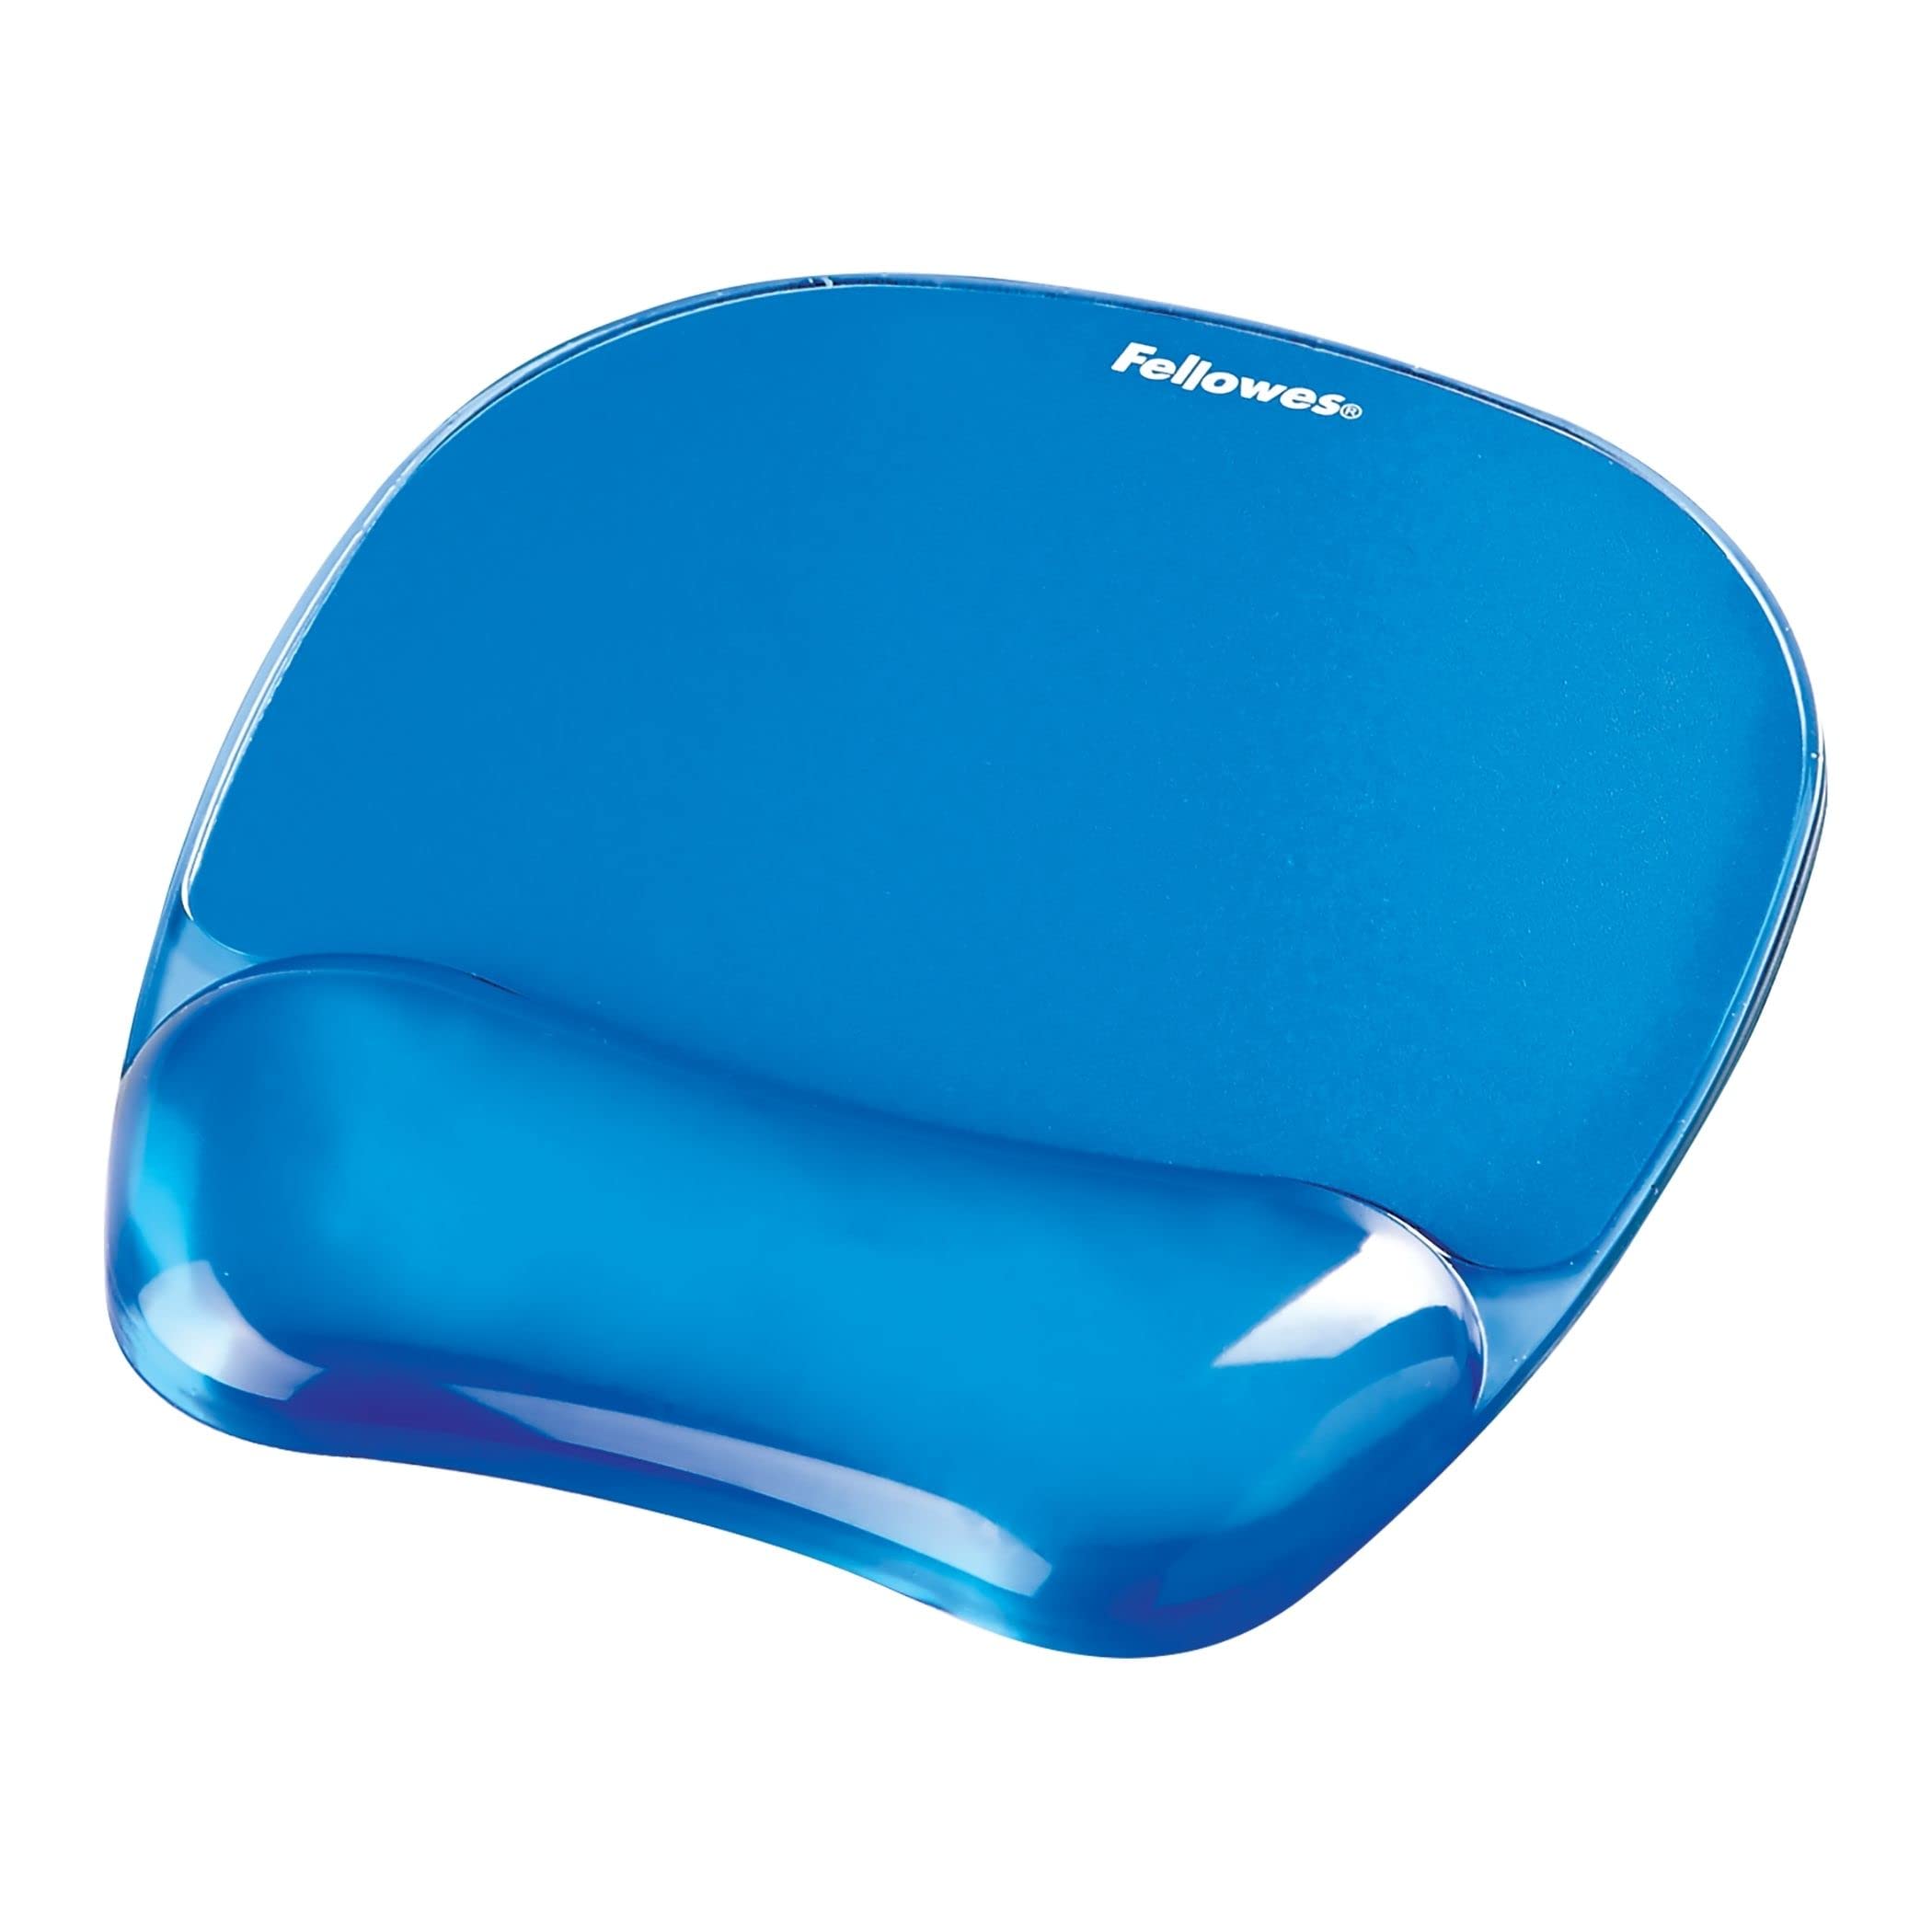 Fellowes Crystals Gel Mouse Mat with Wrist Support - Mouse Pad with Non Slip Rubber Base - Ergonomic Mousepad for Computer Laptop - Blue